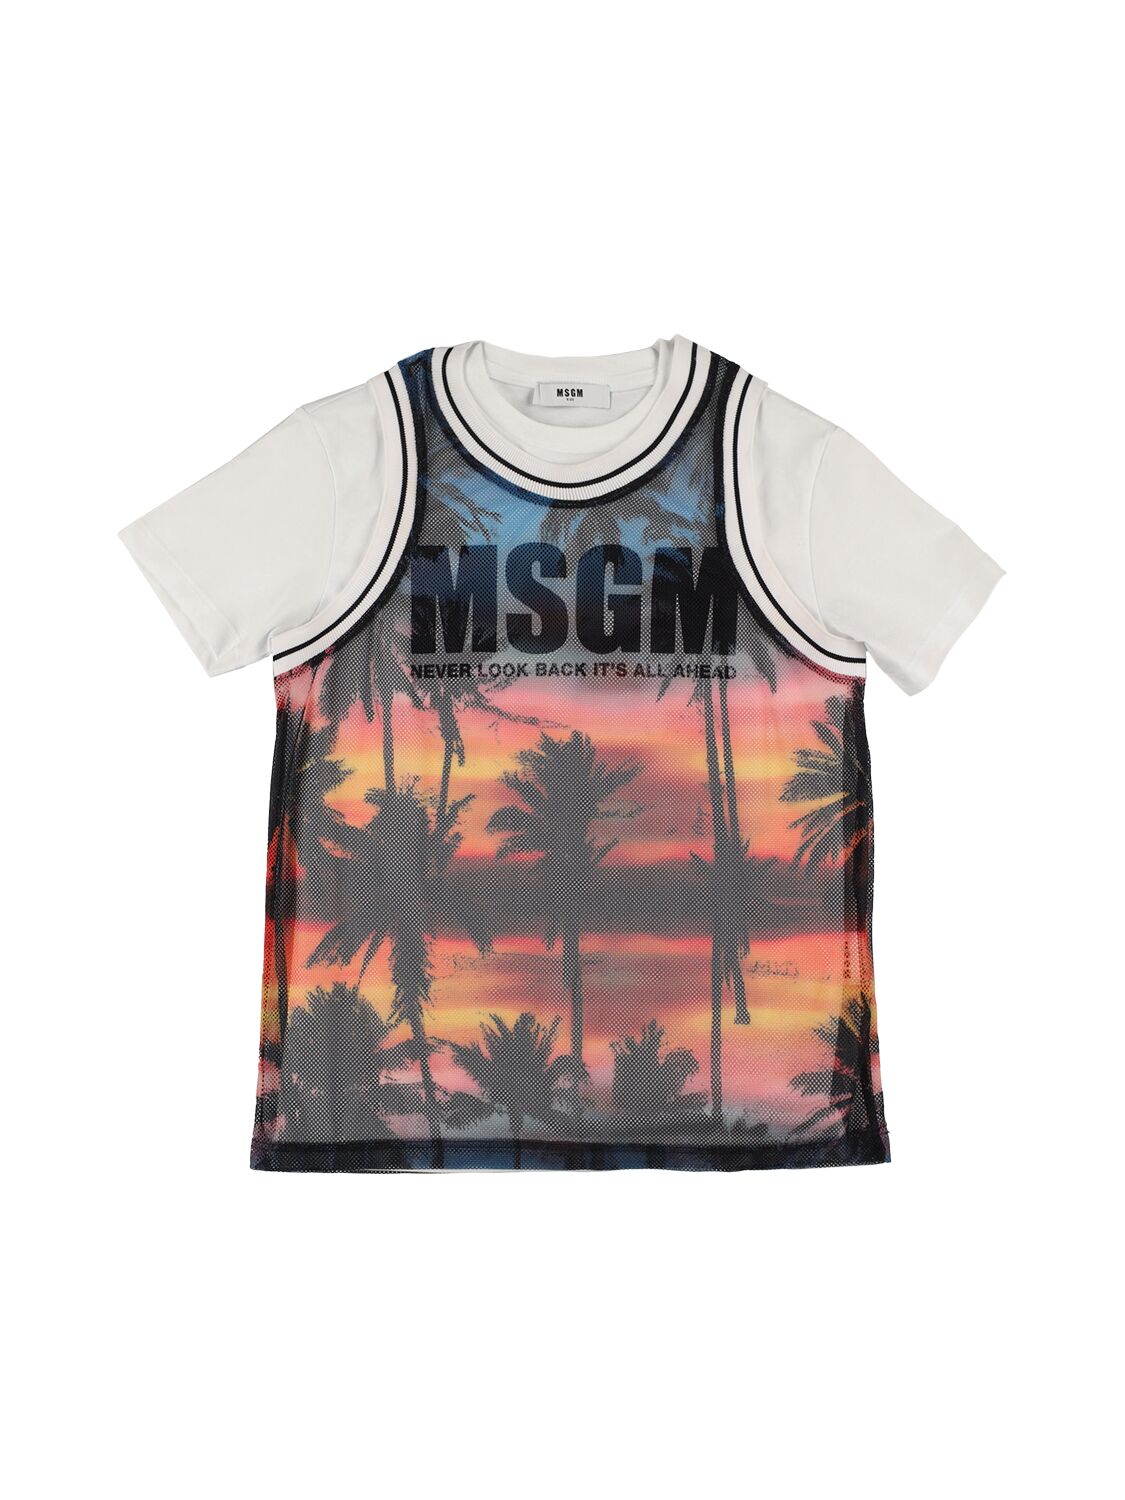 Msgm Kids' Cotton Jersey T-shirt & Mesh Top In White